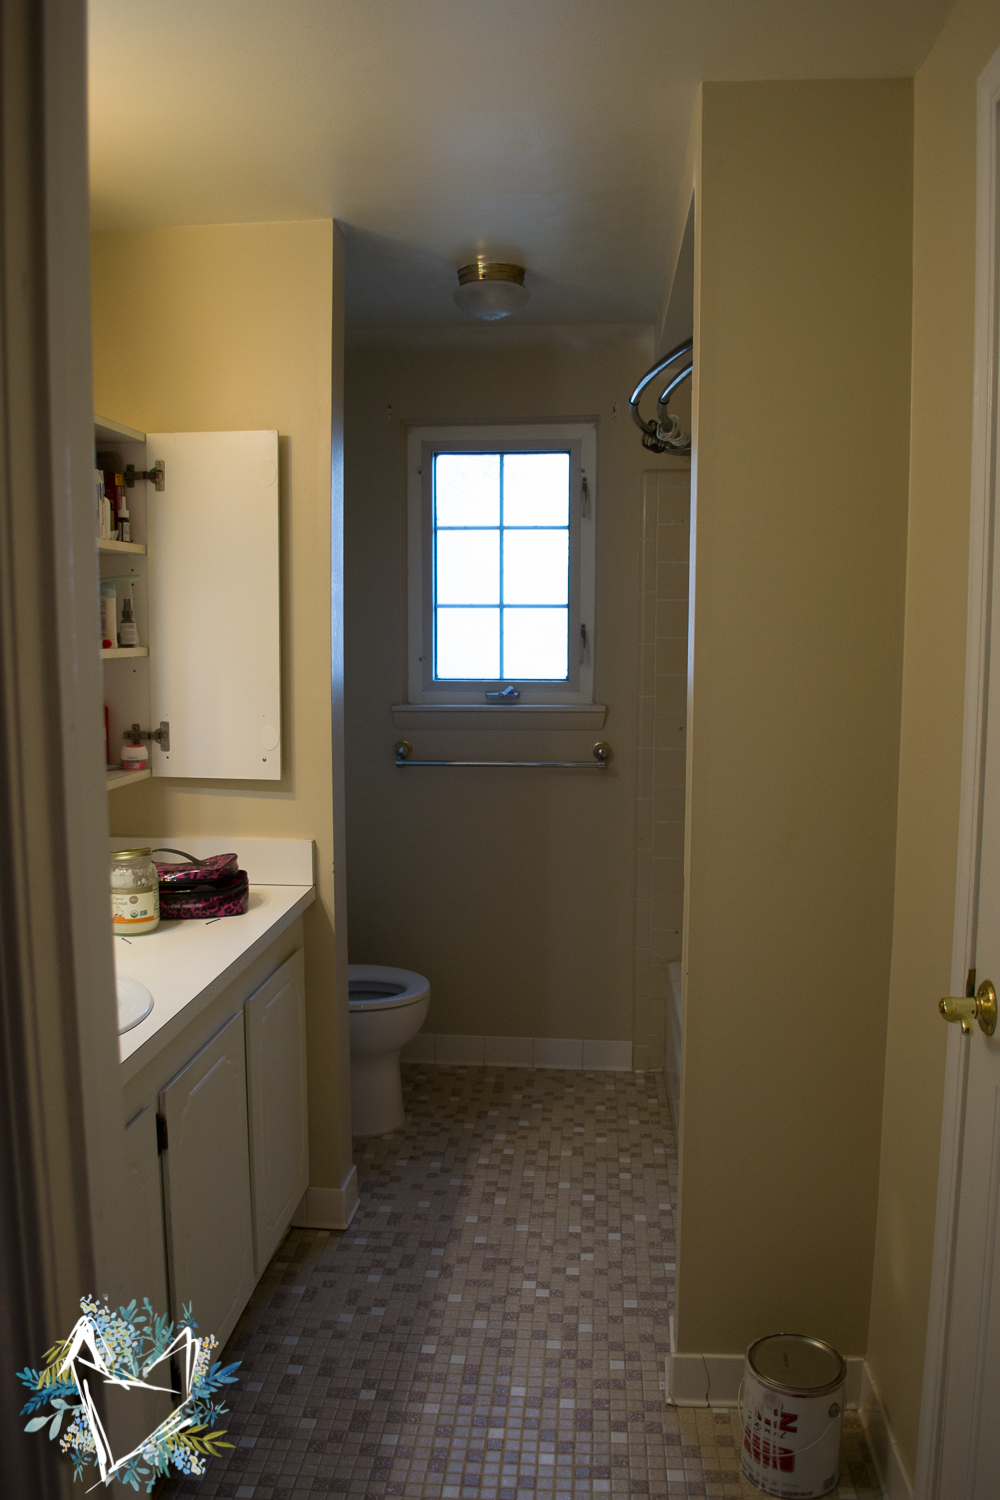 See what you can do to an outdated bathroom for less than $5,000. This makeover proves you don't need to spend a lot to make a huge impact. See the after by clicking on the image!